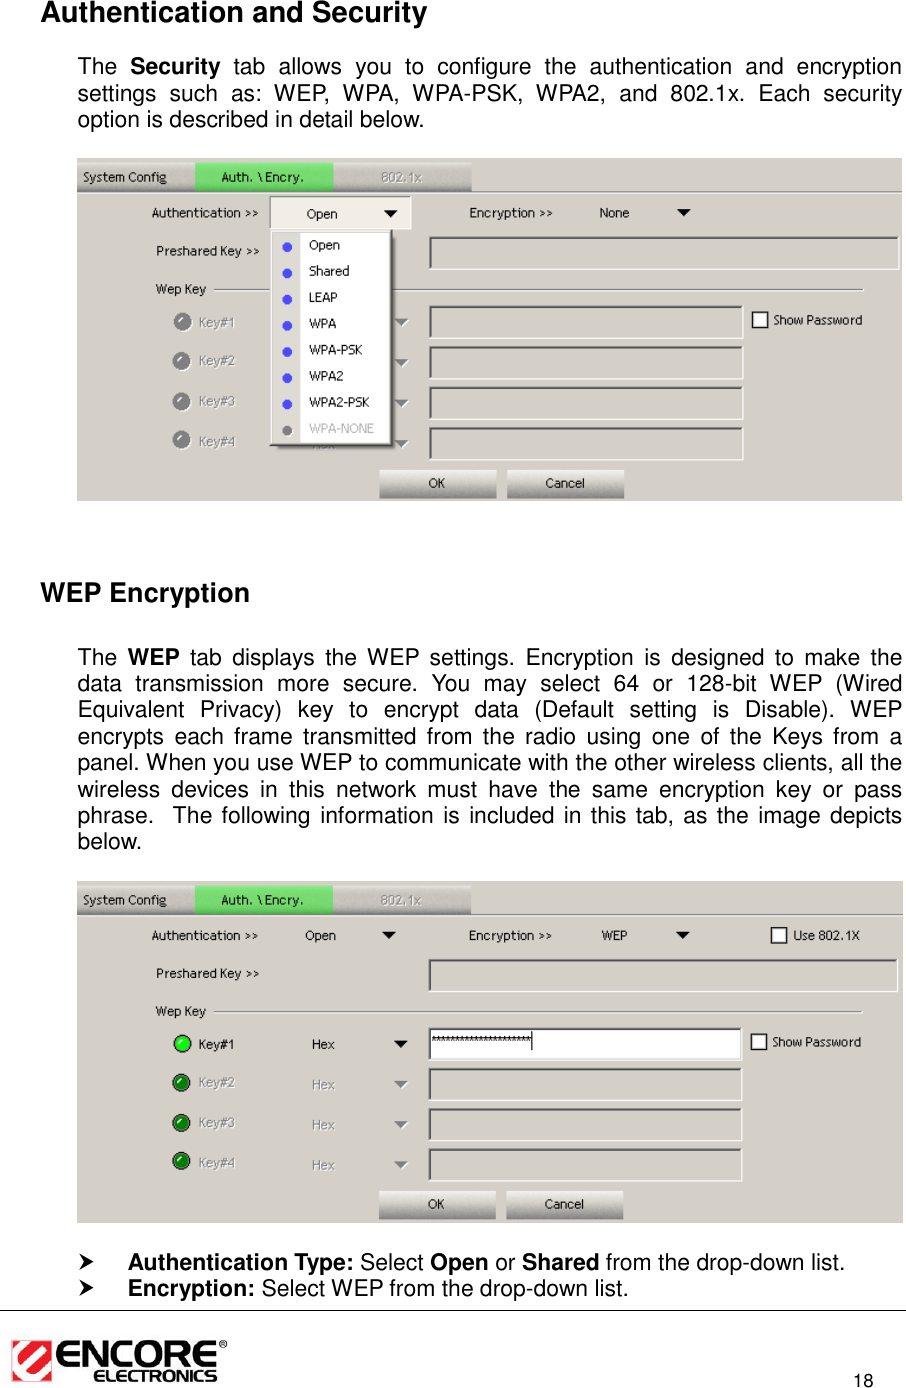                                                                                                                          18    Authentication and Security The  Security  tab  allows  you  to  configure  the  authentication  and  encryption settings  such  as:  WEP,  WPA,  WPA-PSK,  WPA2,  and  802.1x.  Each  security option is described in detail below.        WEP Encryption  The  WEP tab  displays  the  WEP  settings.  Encryption  is  designed  to  make  the data  transmission  more  secure.  You  may  select  64  or  128-bit  WEP  (Wired Equivalent  Privacy)  key  to  encrypt  data  (Default  setting  is  Disable).  WEP encrypts  each  frame  transmitted  from  the  radio  using  one  of  the  Keys  from  a panel. When you use WEP to communicate with the other wireless clients, all the wireless  devices  in  this  network  must  have  the  same  encryption  key  or  pass phrase.  The following information is included in this tab, as the image depicts below.     Authentication Type: Select Open or Shared from the drop-down list.   Encryption: Select WEP from the drop-down list.  